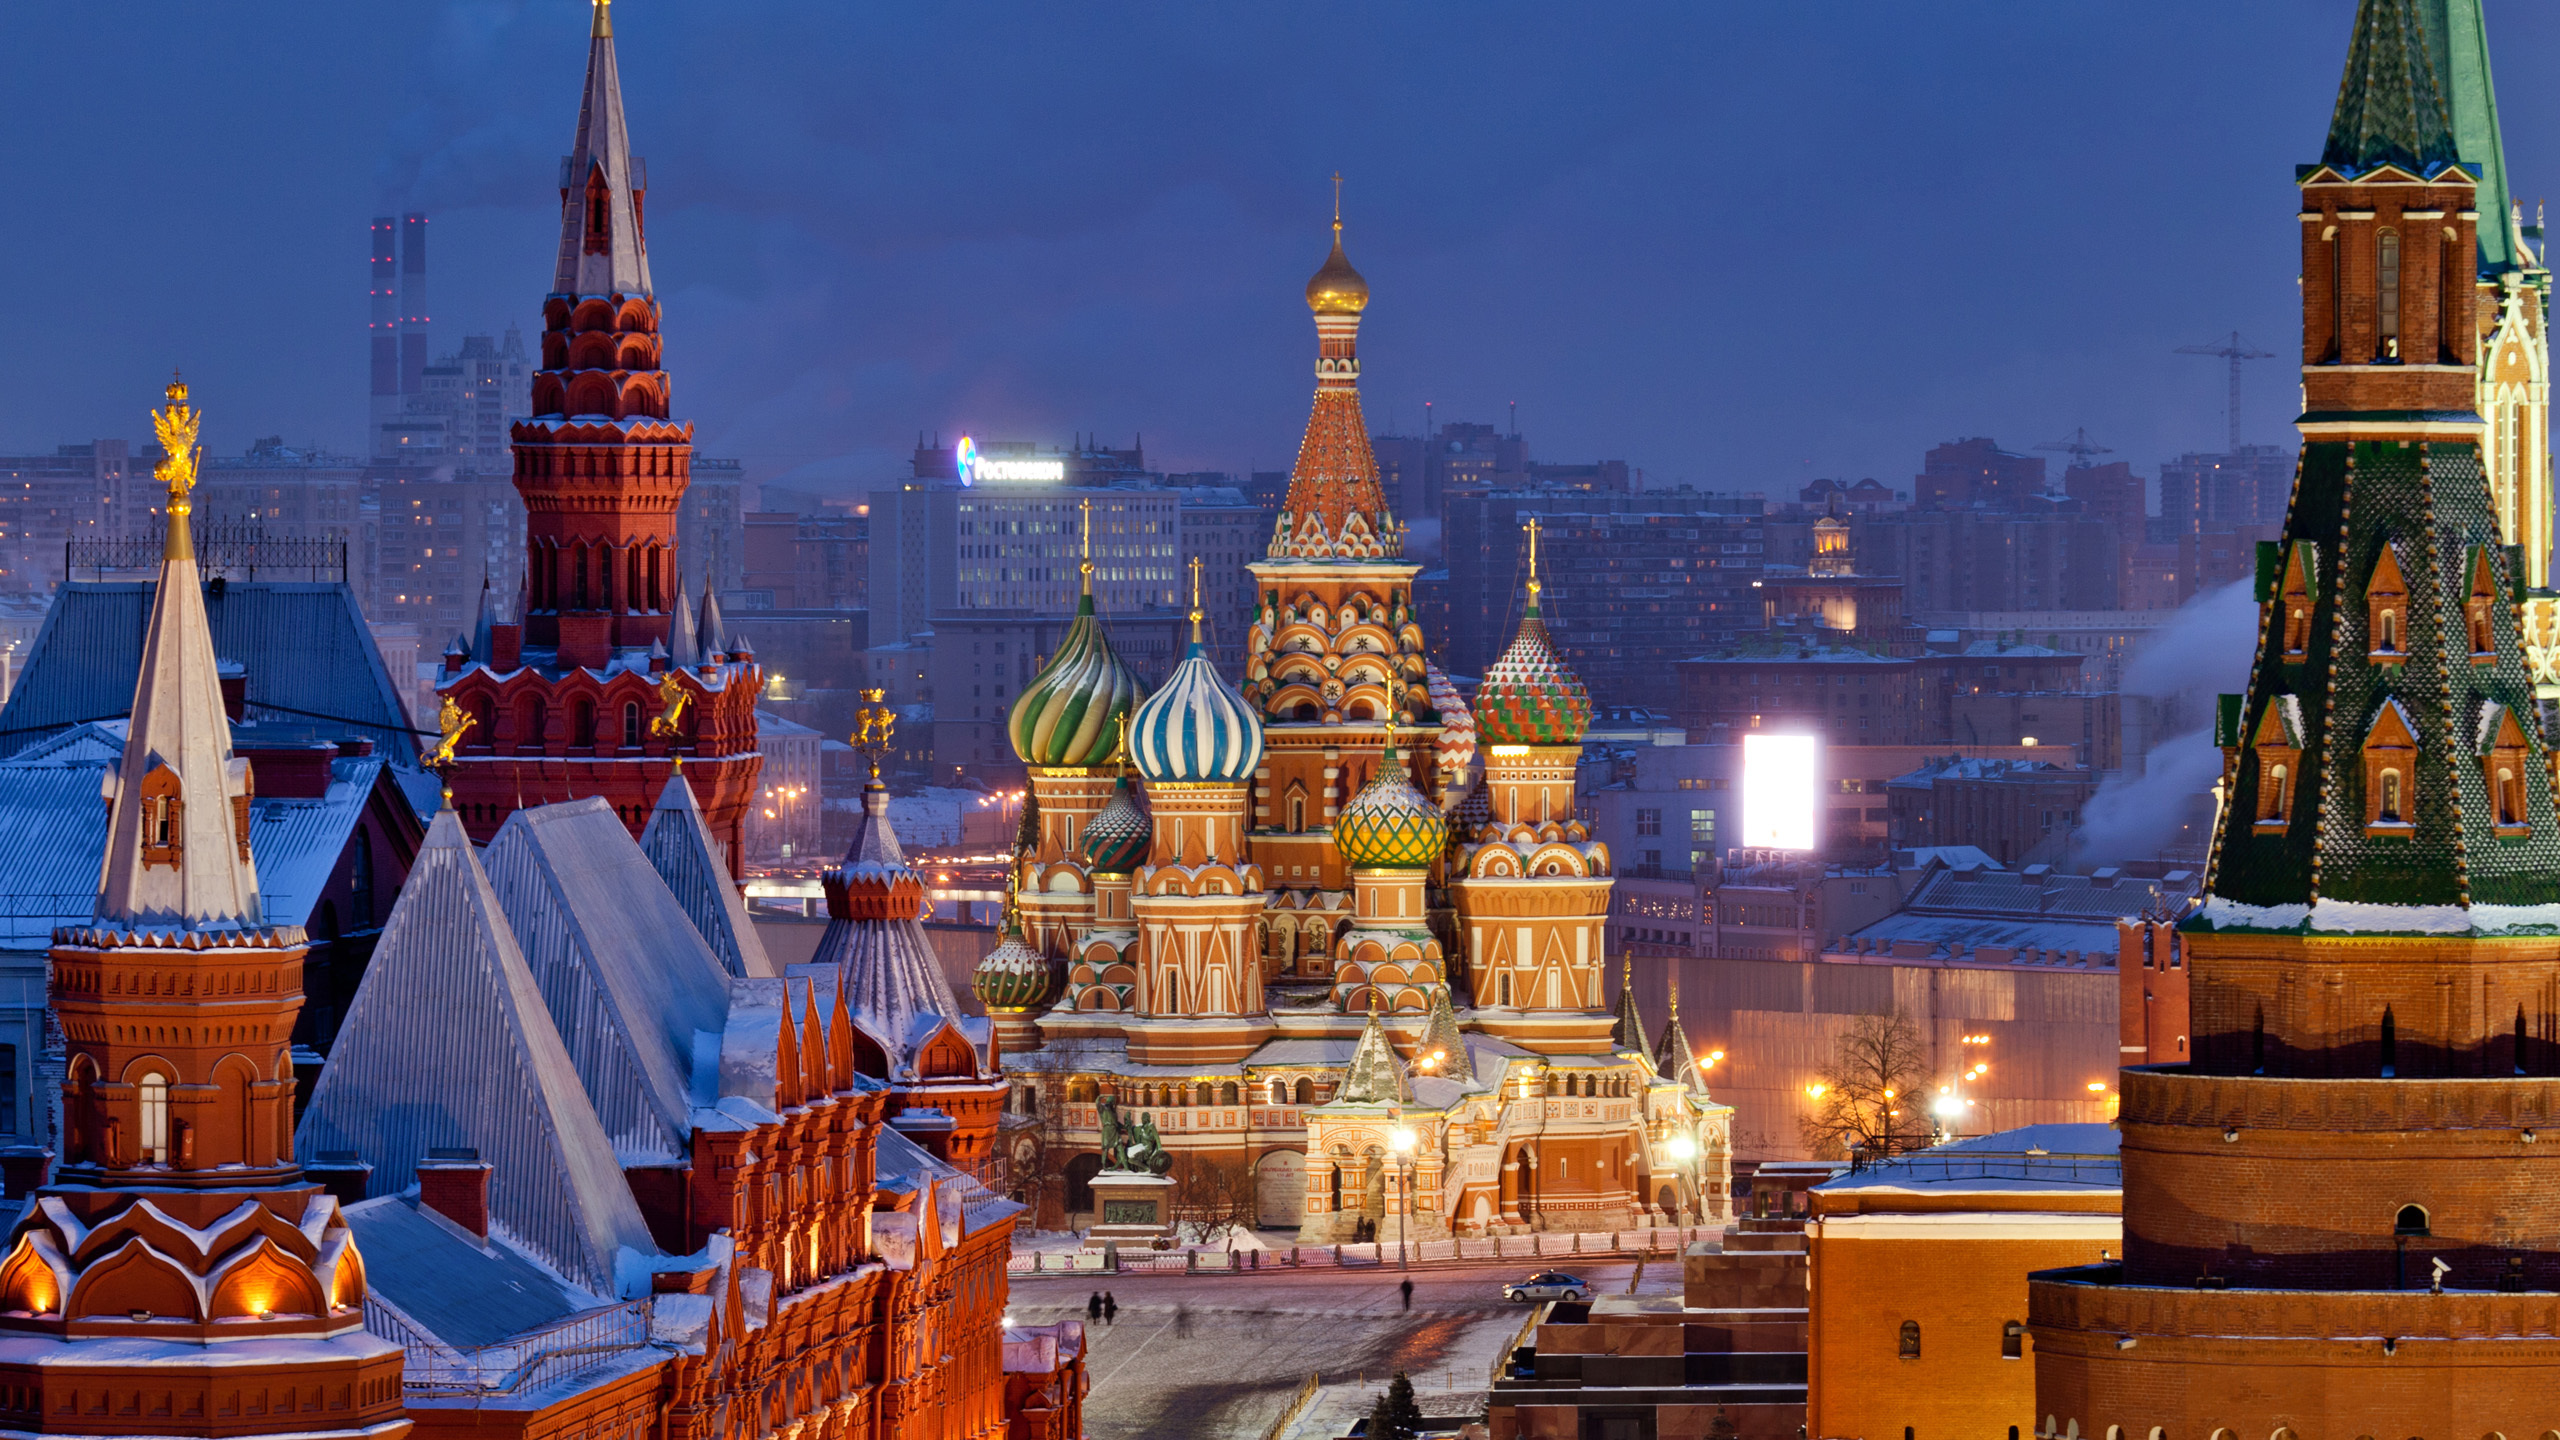 saint basil's cathedral, religious, cathedrals High Definition image